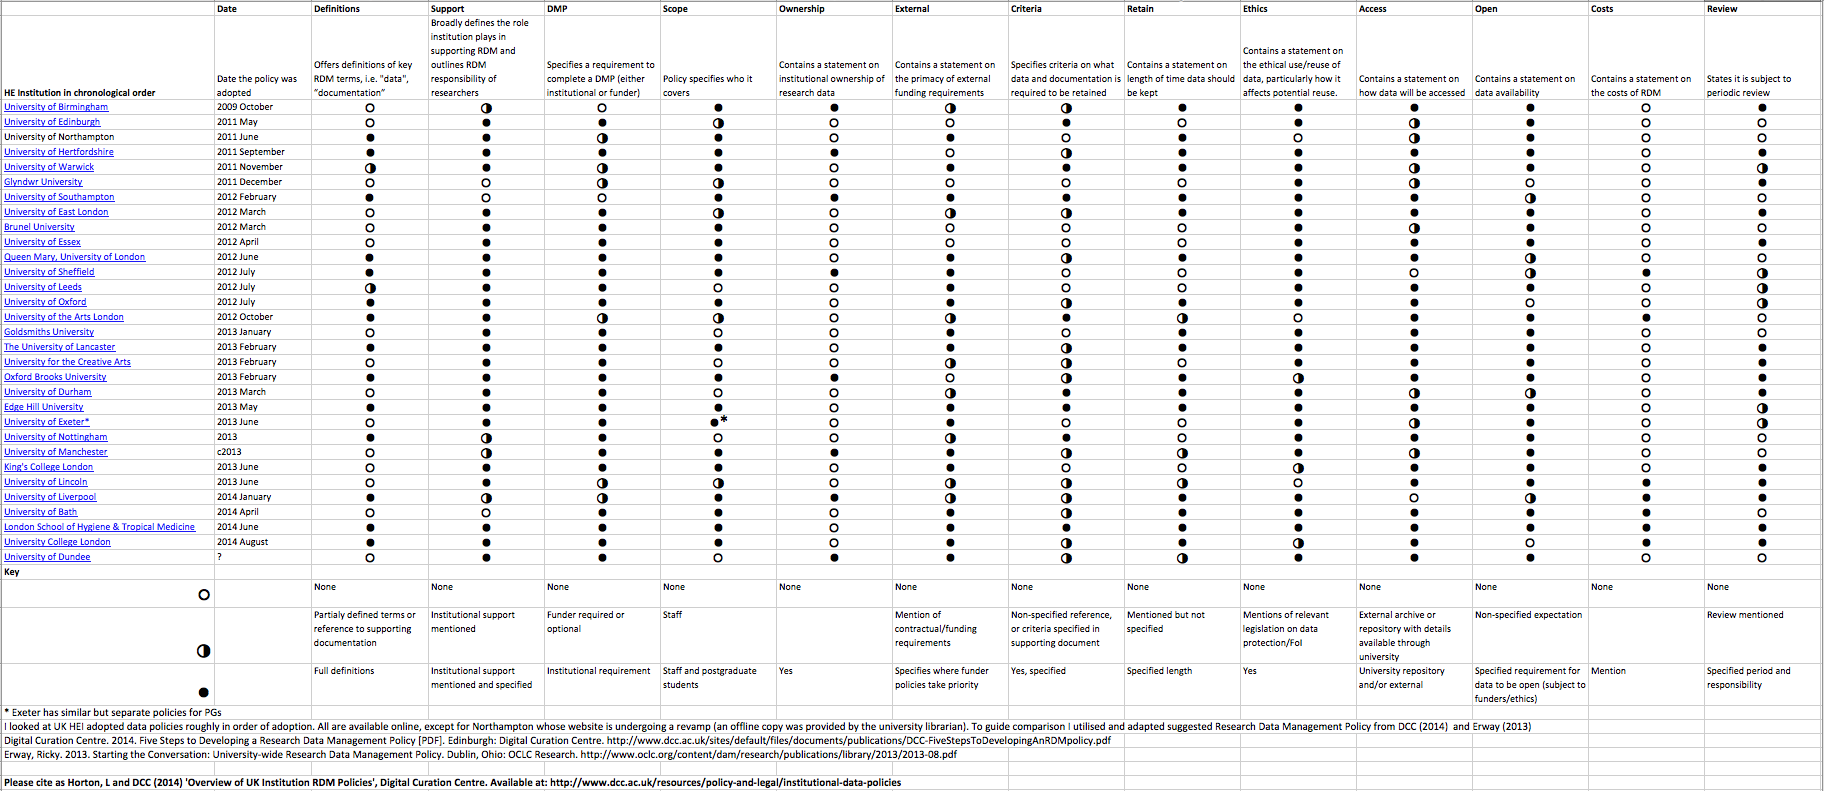 A table showing a comparison of content of policies on RDM at different universities